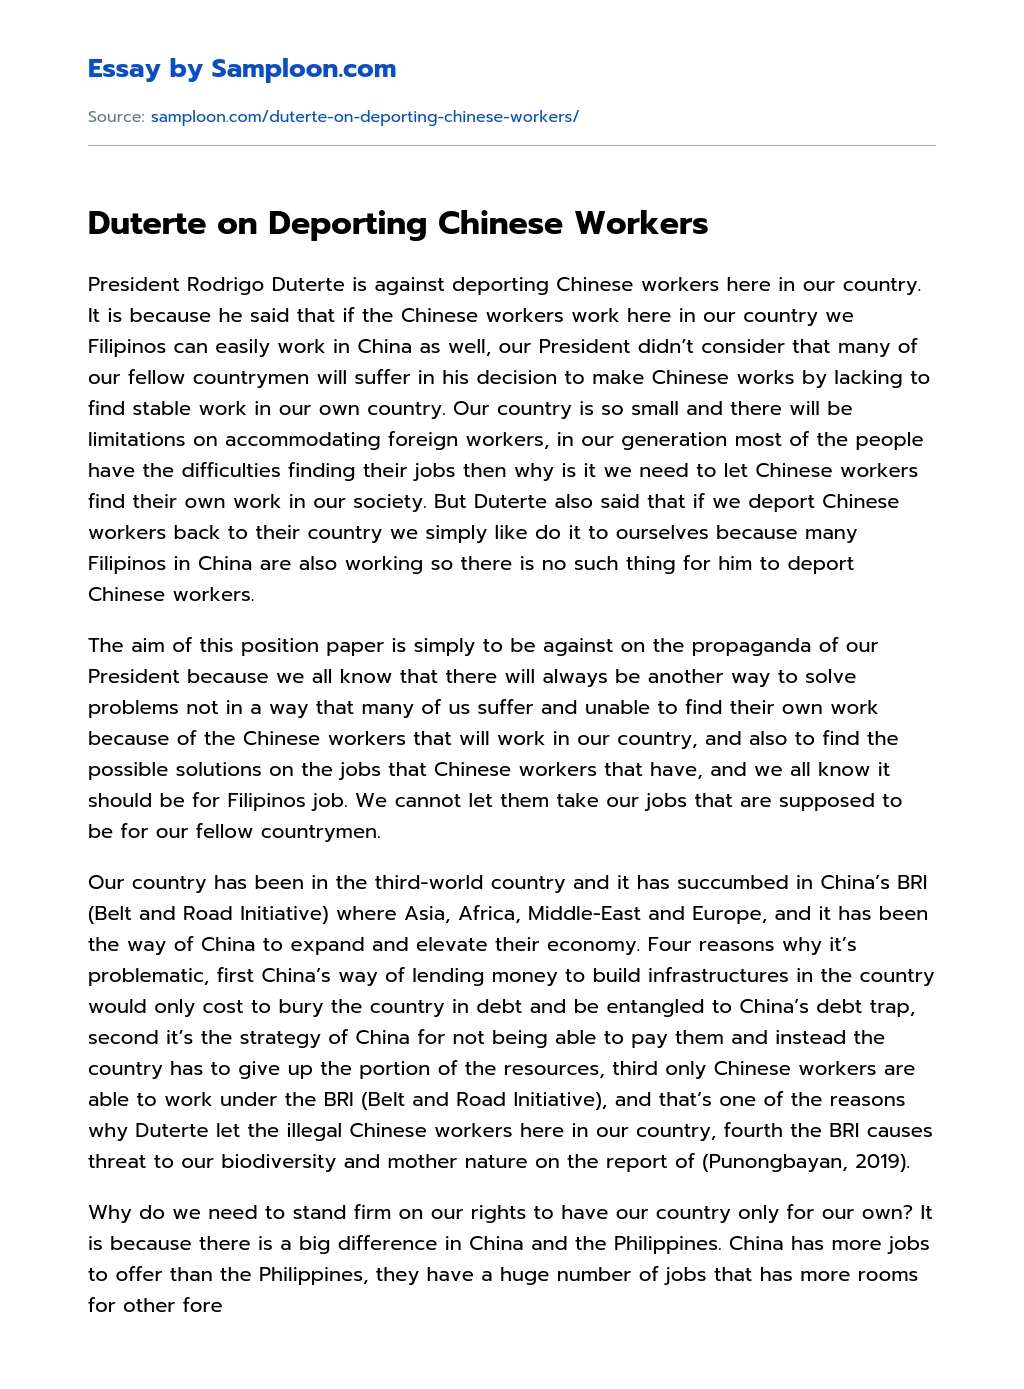 Duterte on Deporting Chinese Workers essay